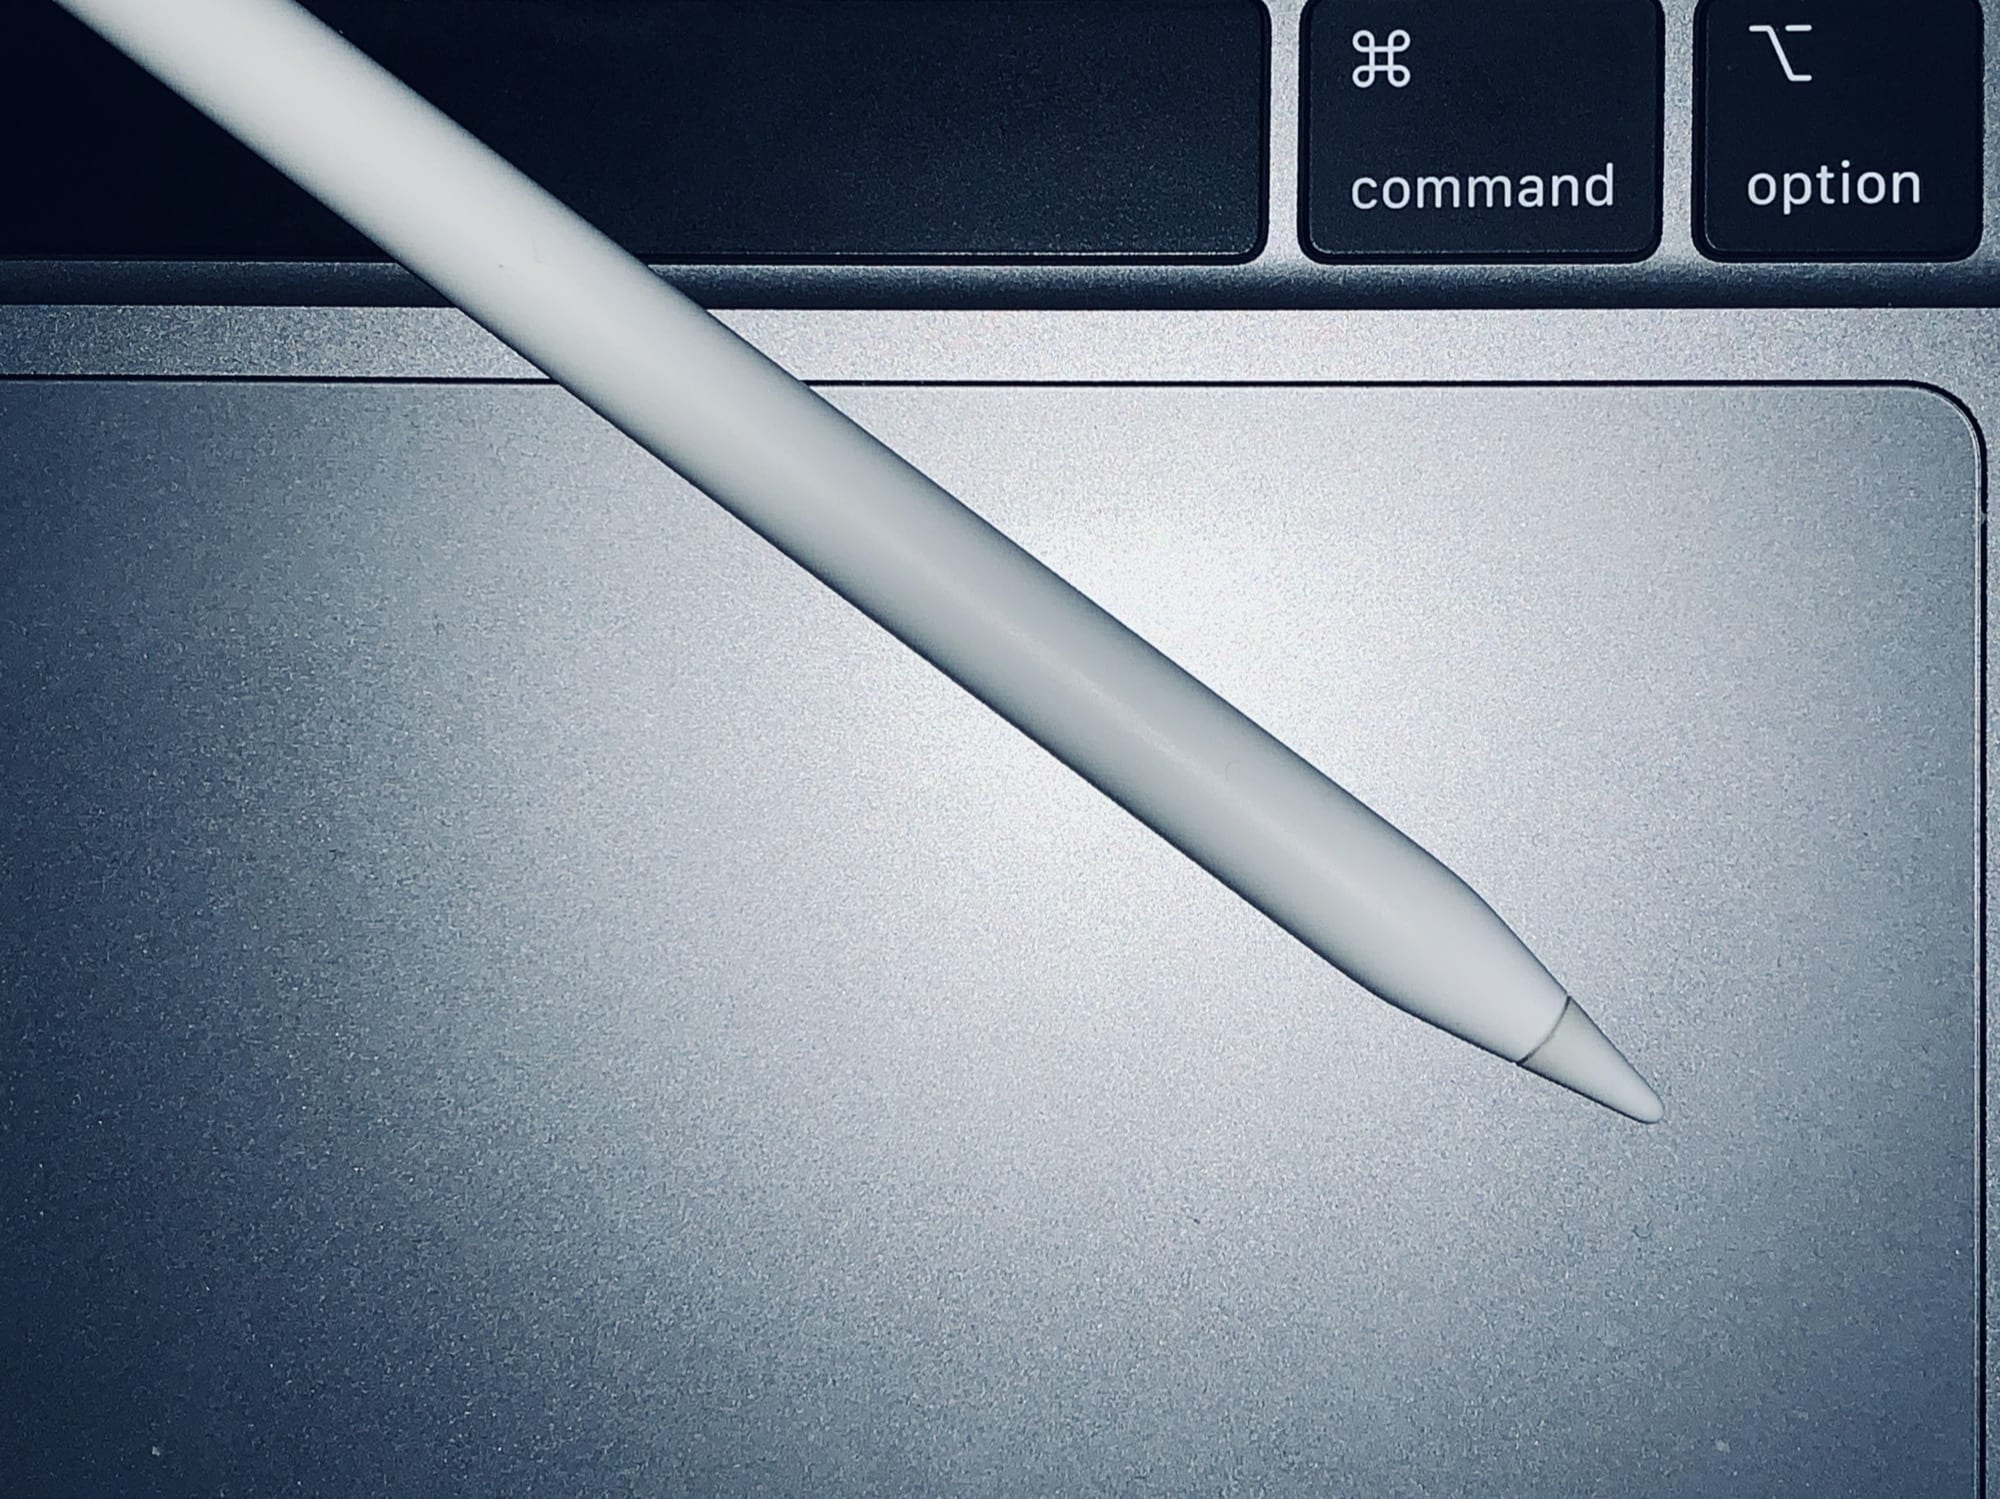 MacBook vs. iPad: You can't use an Apple Pencil with your Mac.